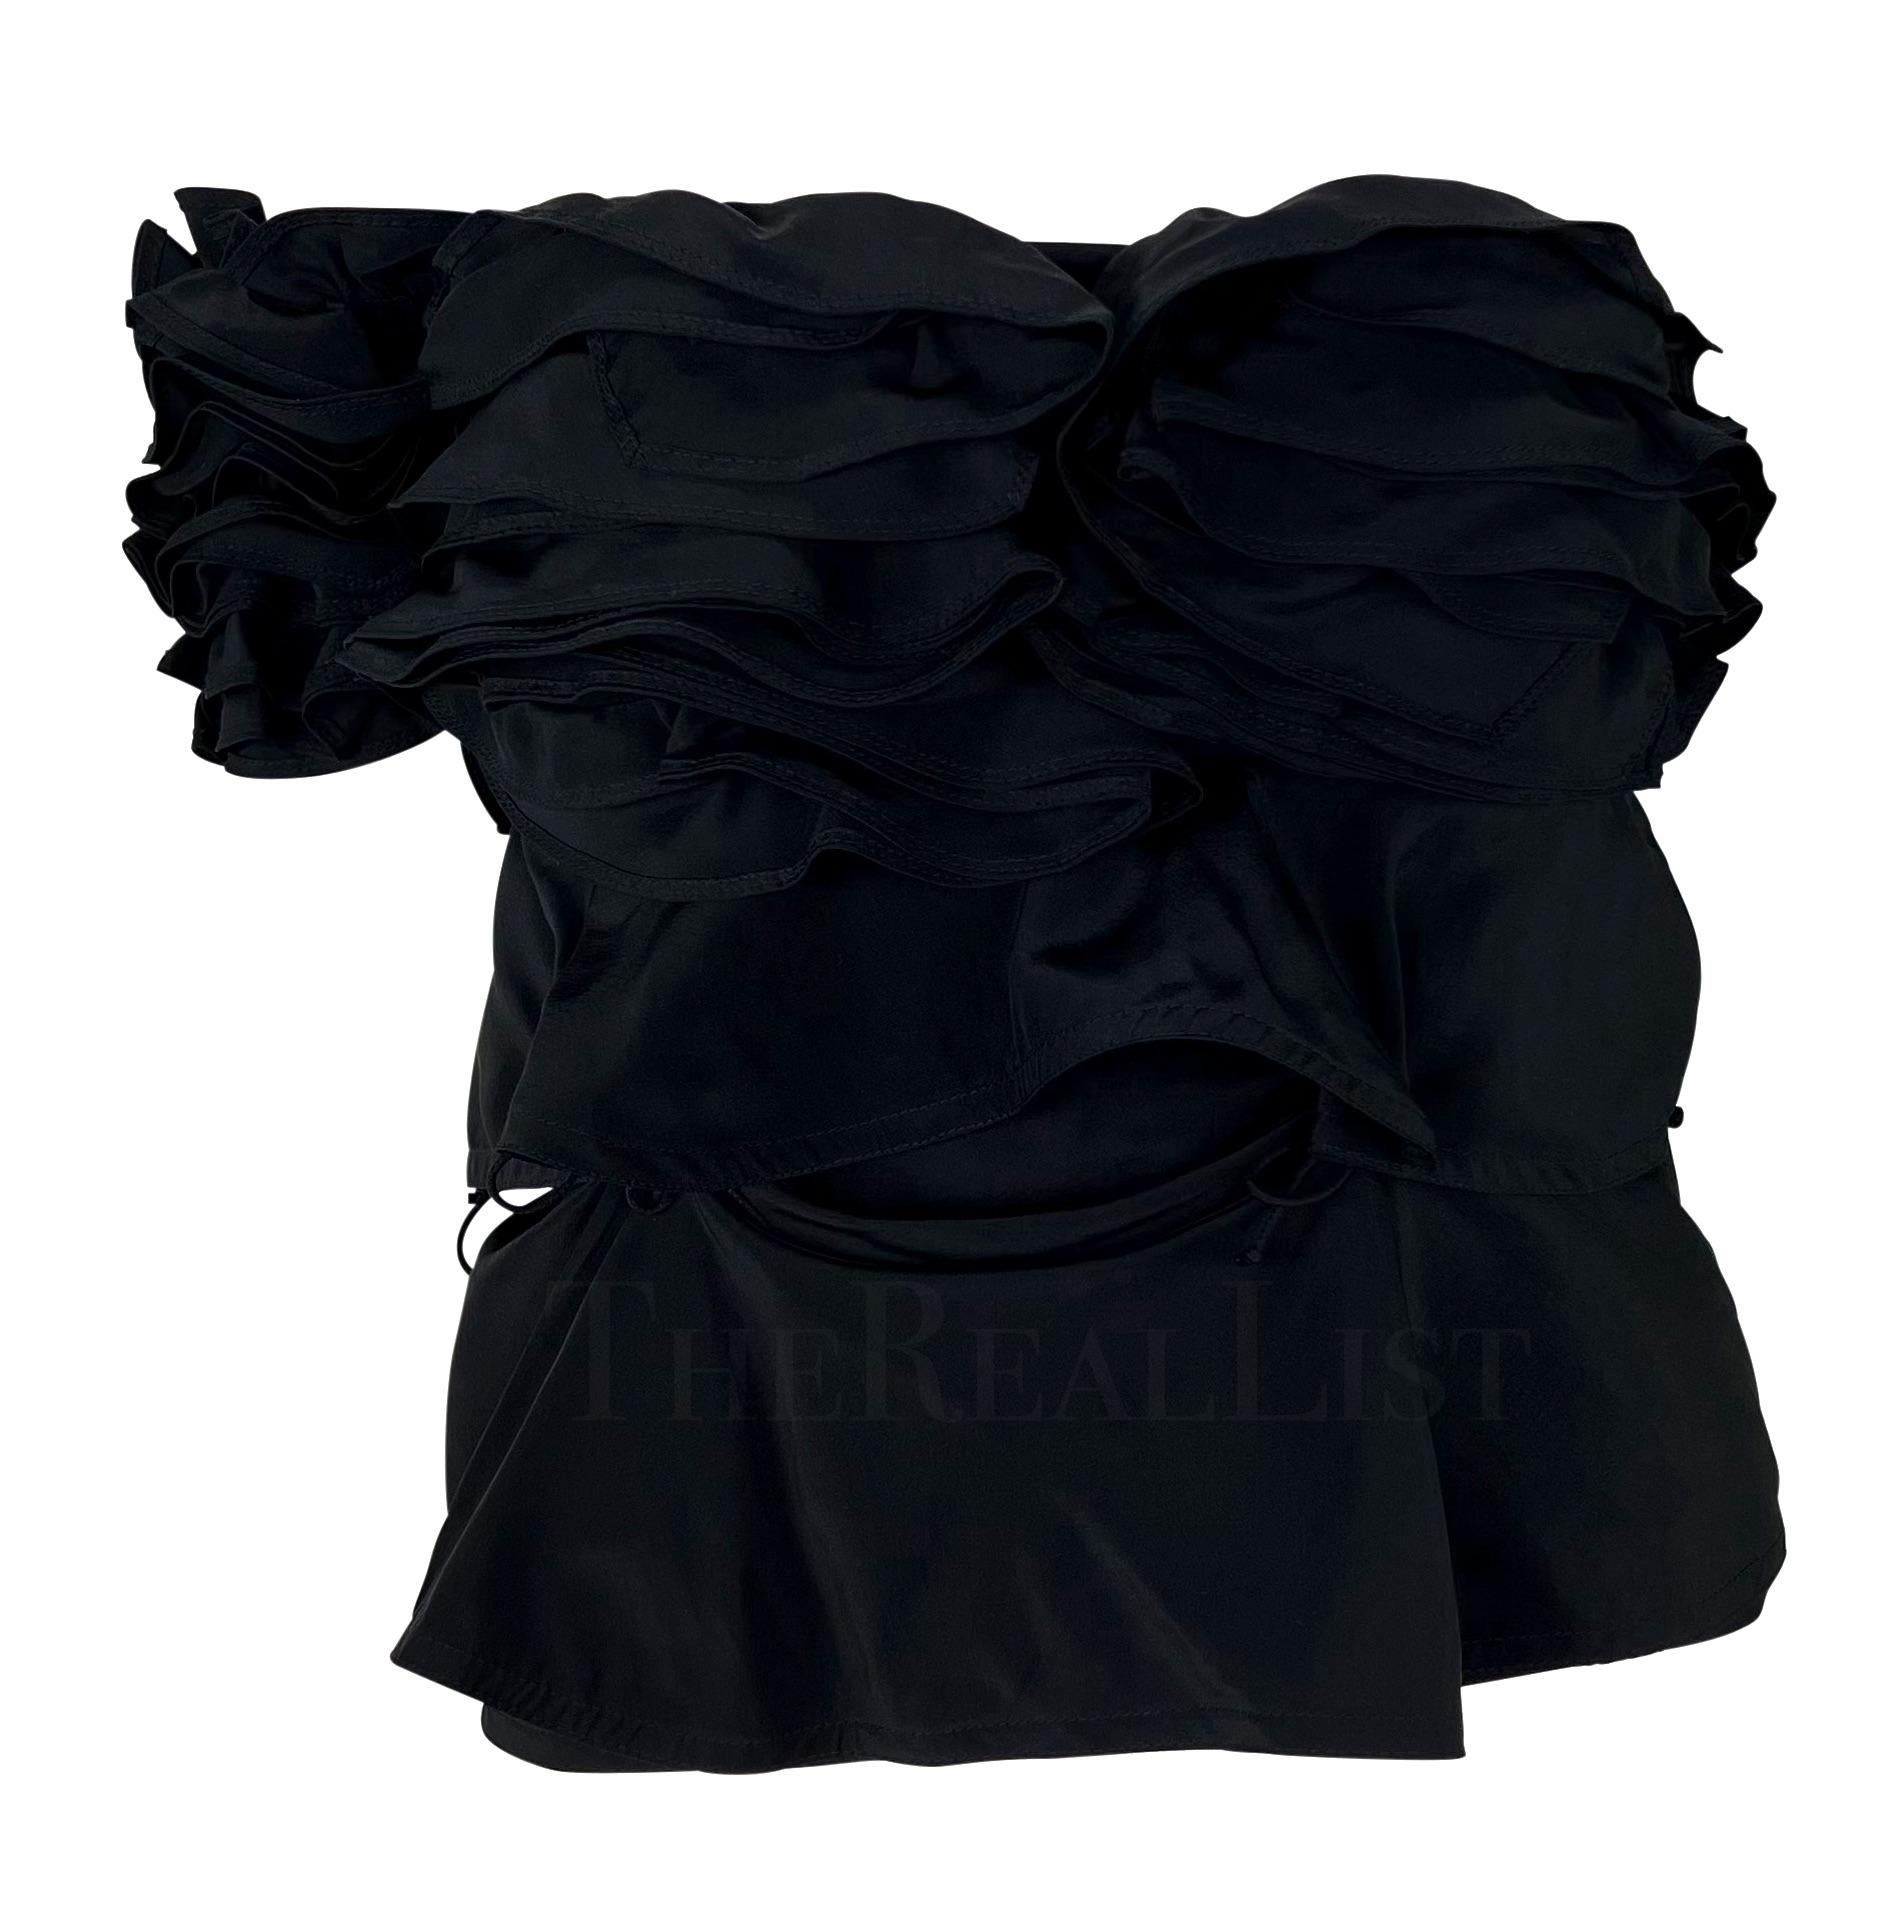 Presenting a fabulous sleeveless black silk Yves Saint Laurent Rive Gauche top, designed by Tom Ford. From the Fall/Winter 2003 collection, this chic black top is constructed of layers of lightweight silk, some connected with little ties, that